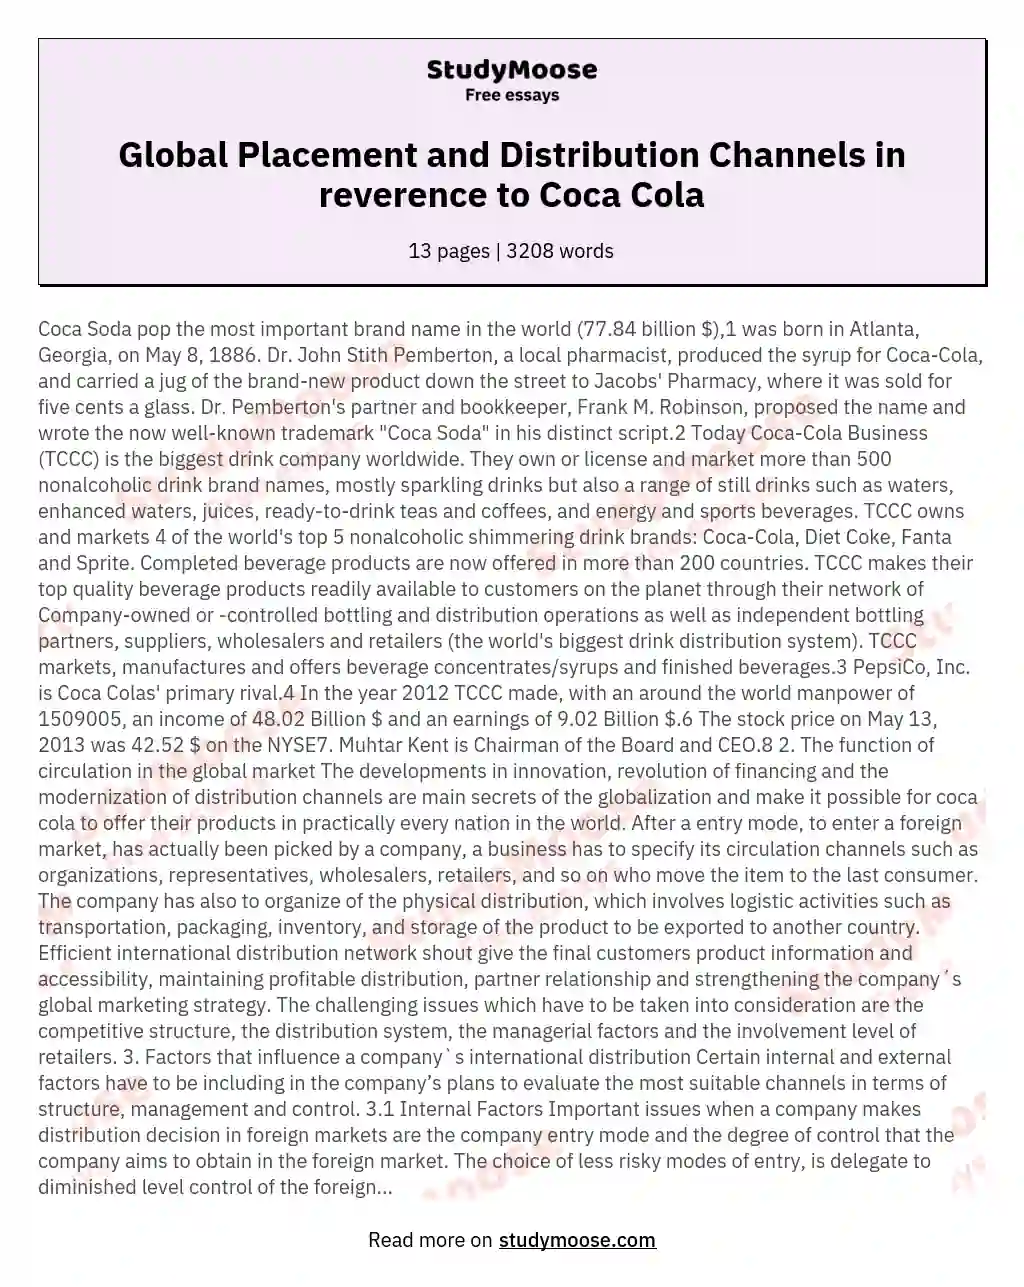 Global Placement and Distribution Channels in reverence to Coca Cola essay